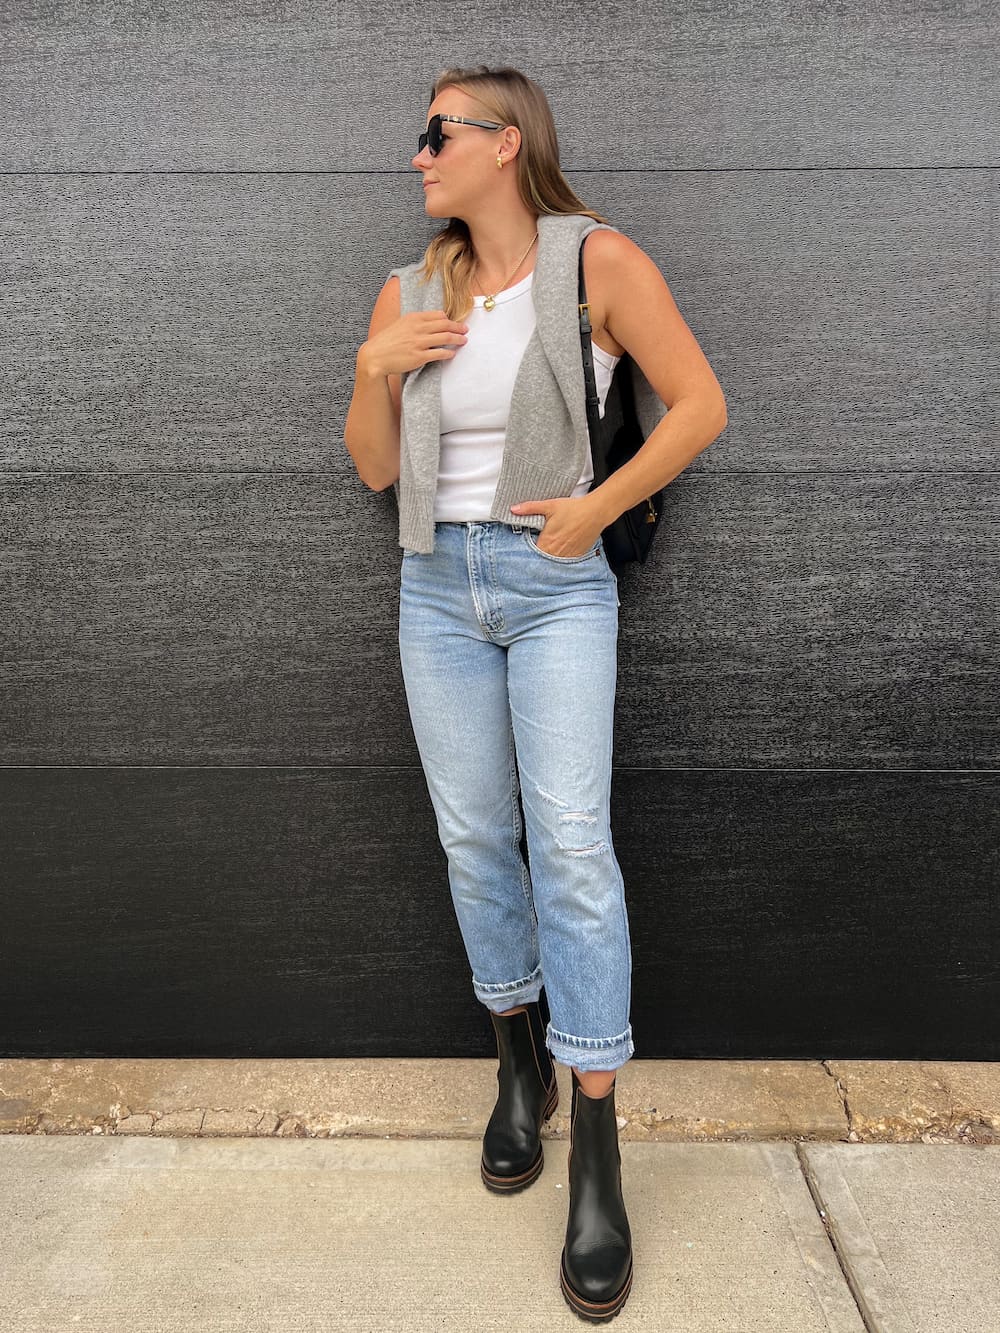 Woman wearing jeans, black Chelsea boots, a white tank and a grey sweater over her shoulder.